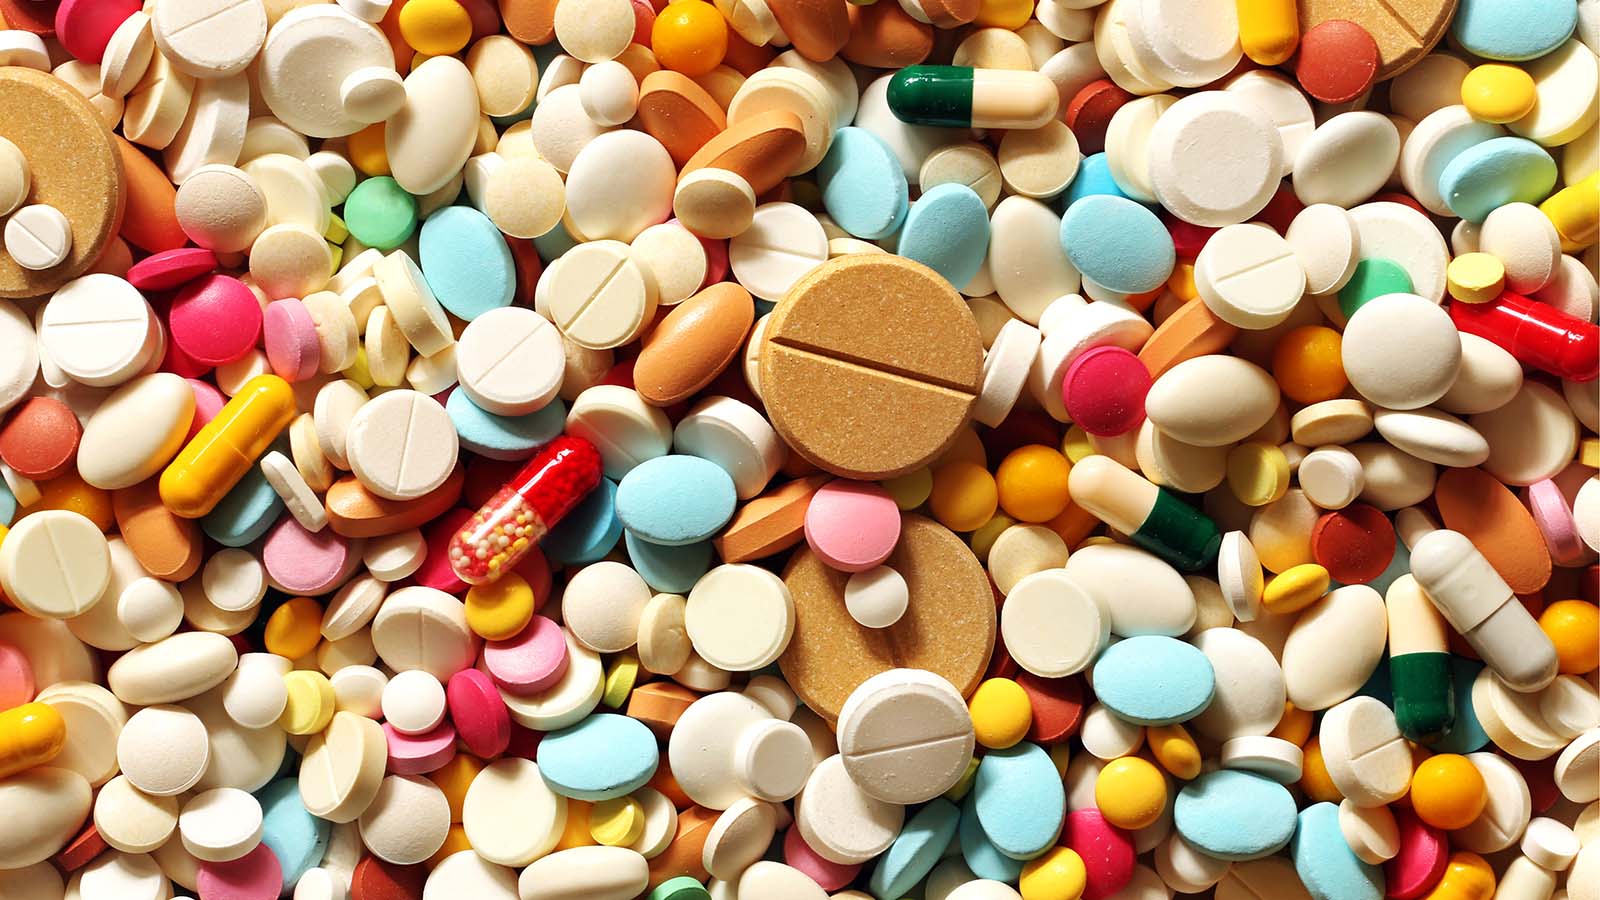 A pile of brightly colored pills in varying sizes and shapes representing VERU stock.